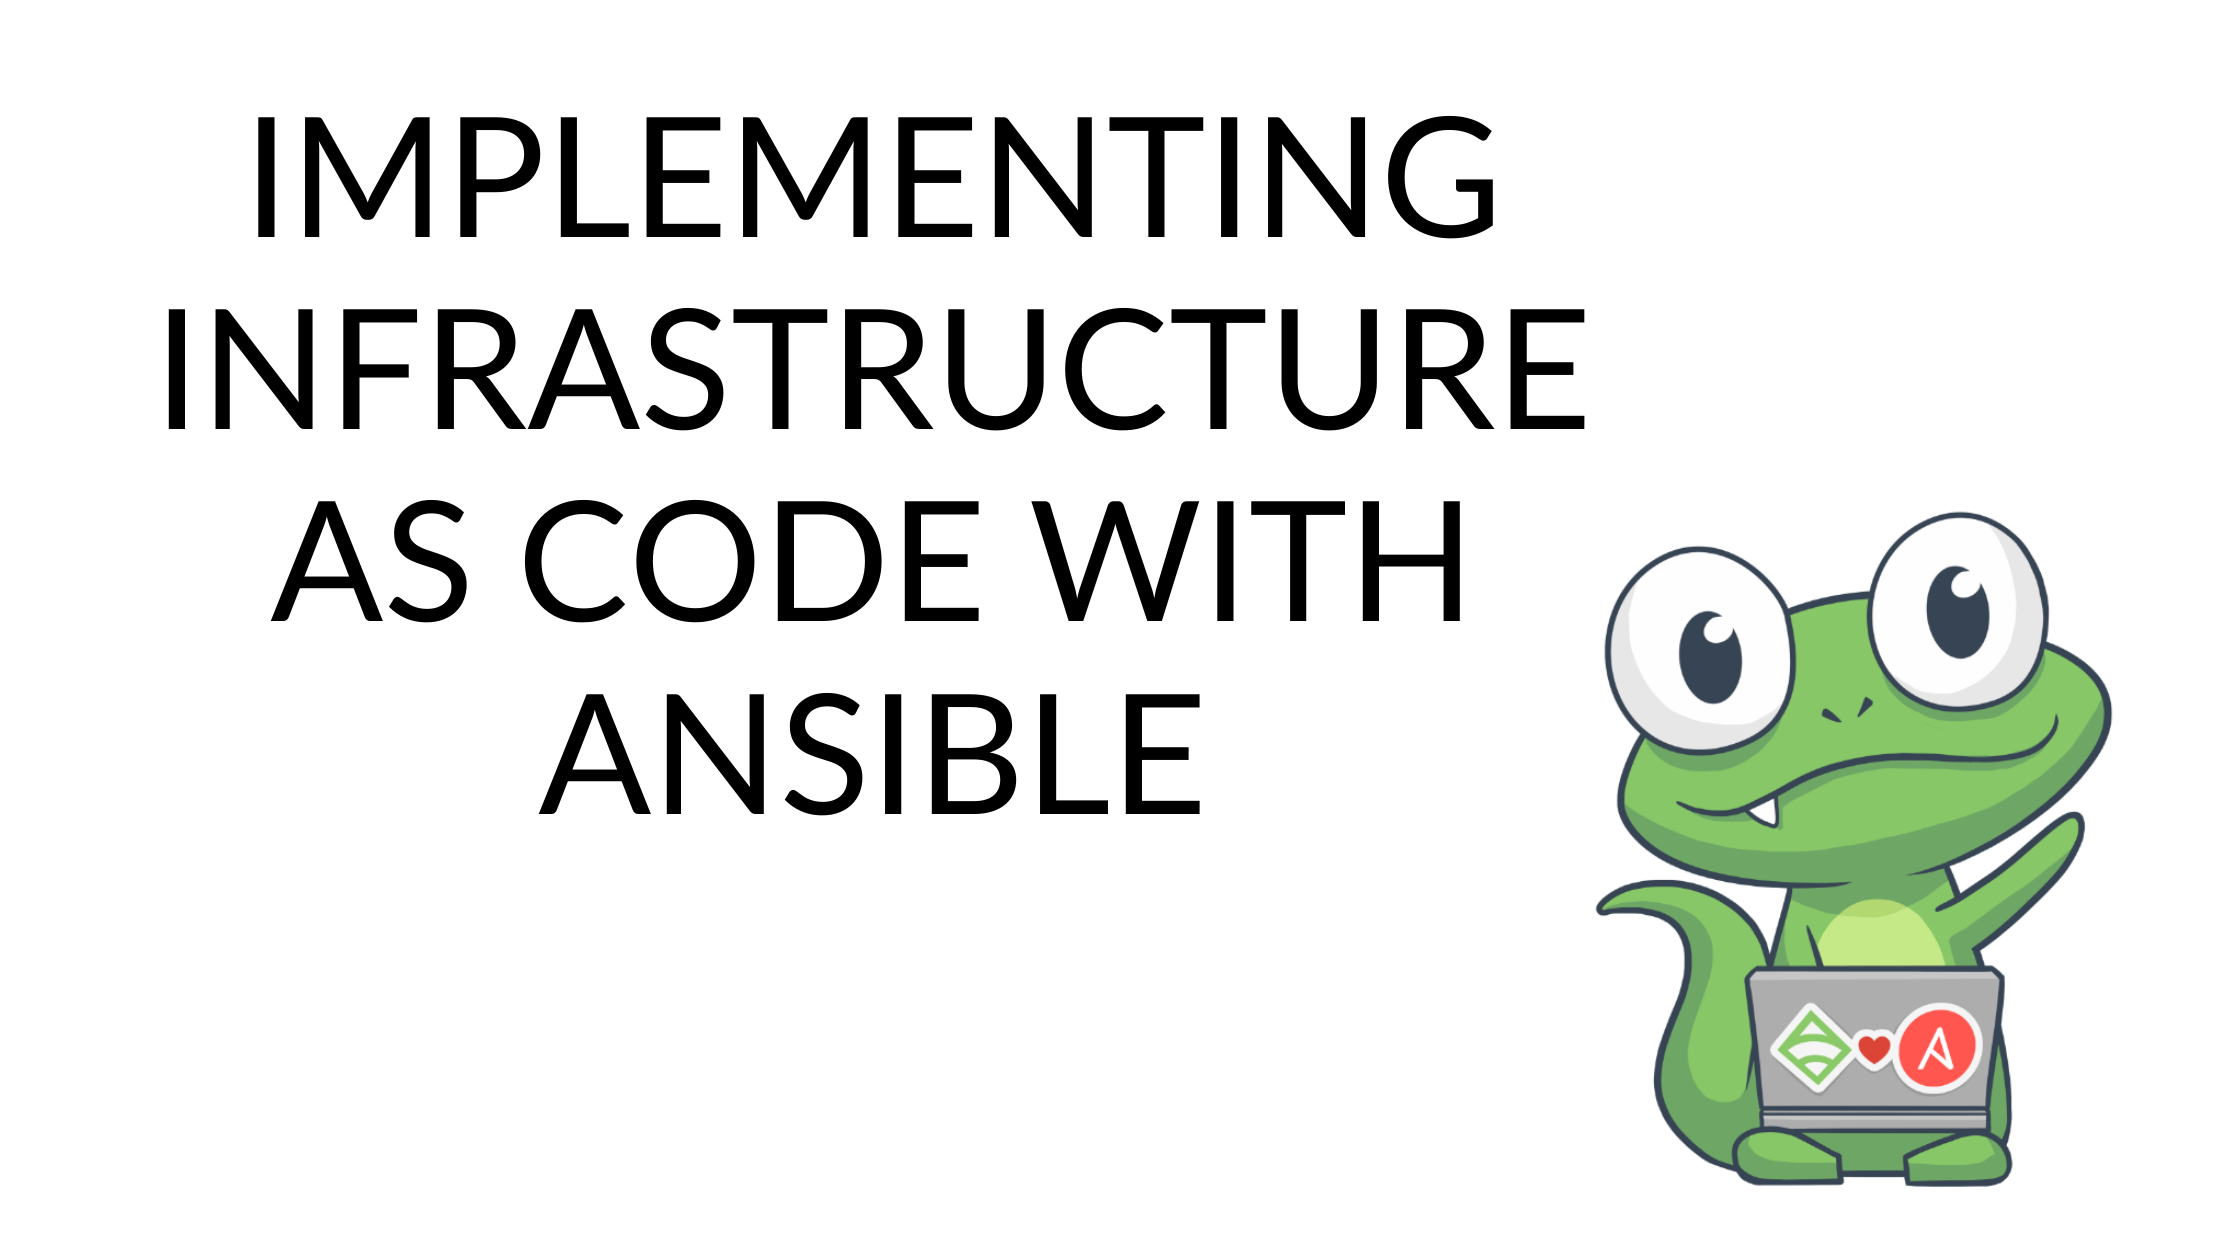 Implementing infrastructure as code with Ansible